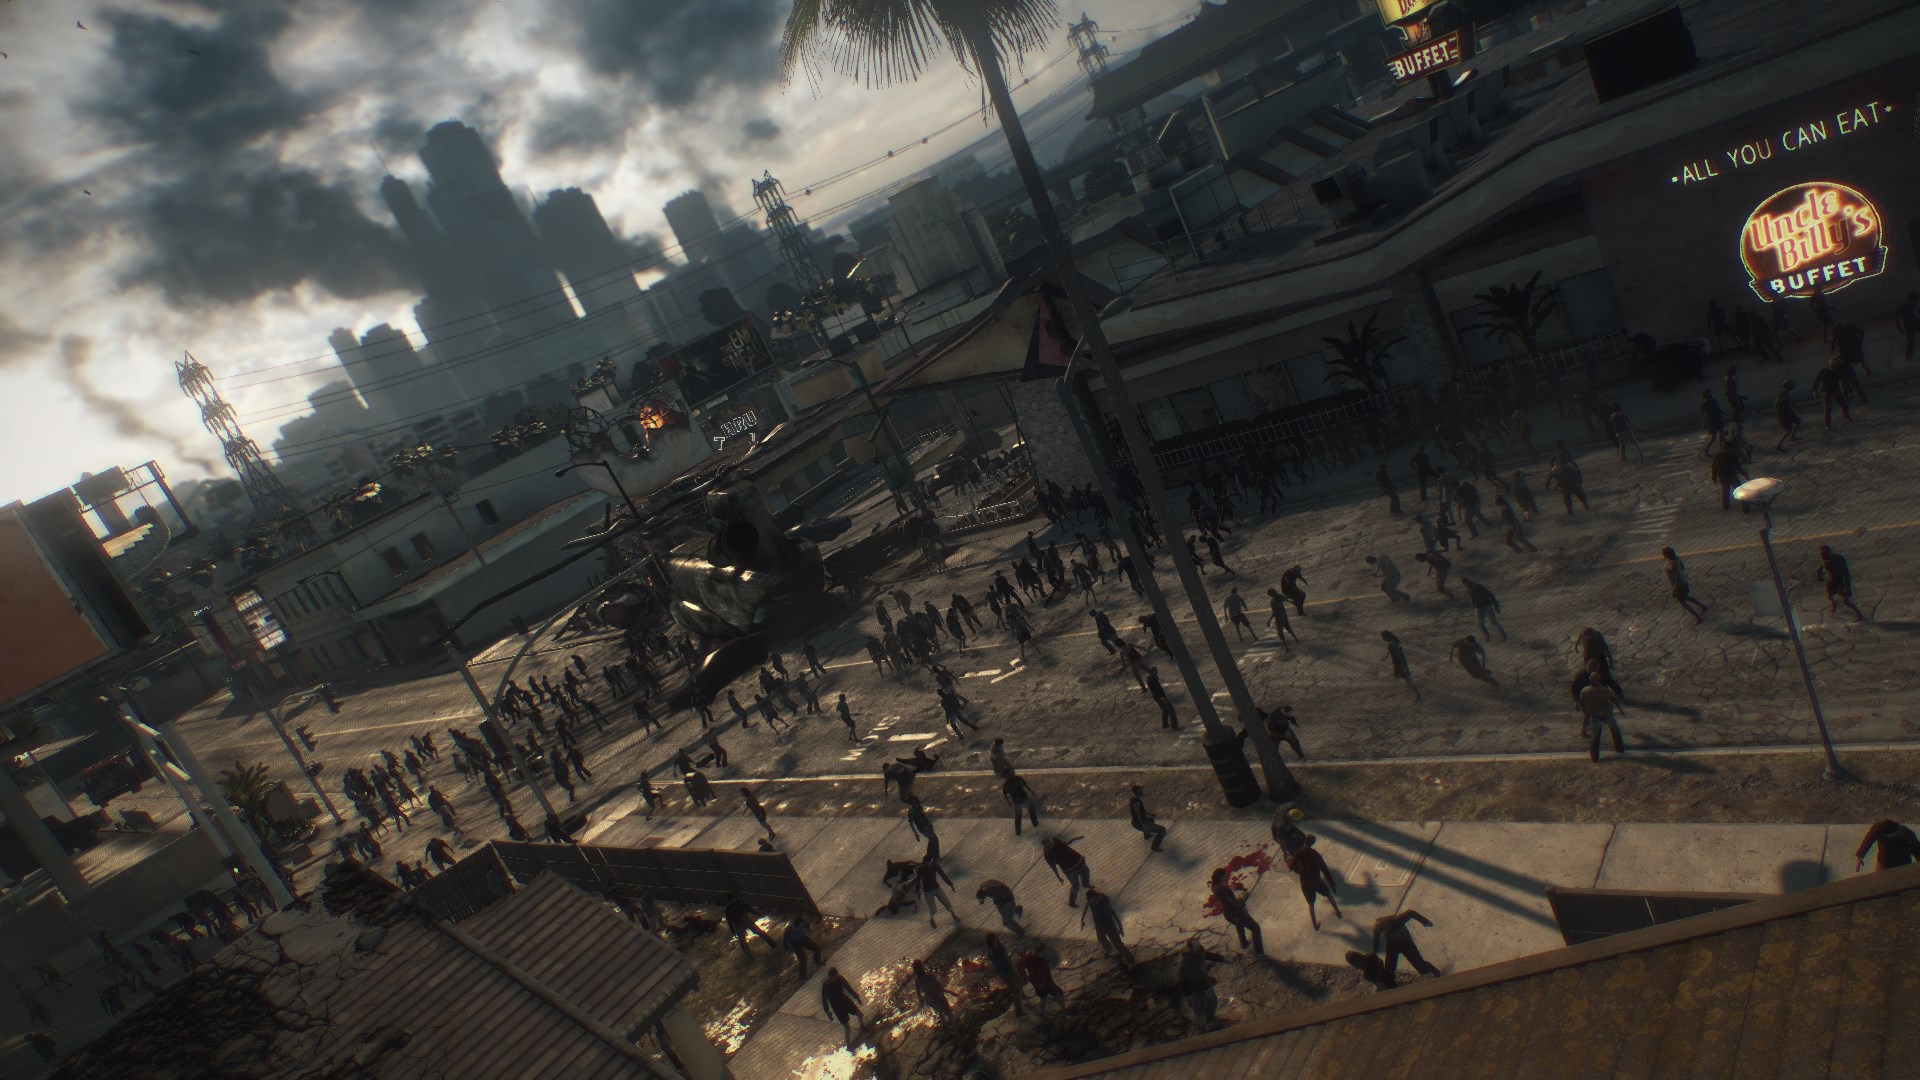 Dead Rising 3: Apocalypse Edition - game screenshots at Riot Pixels, images